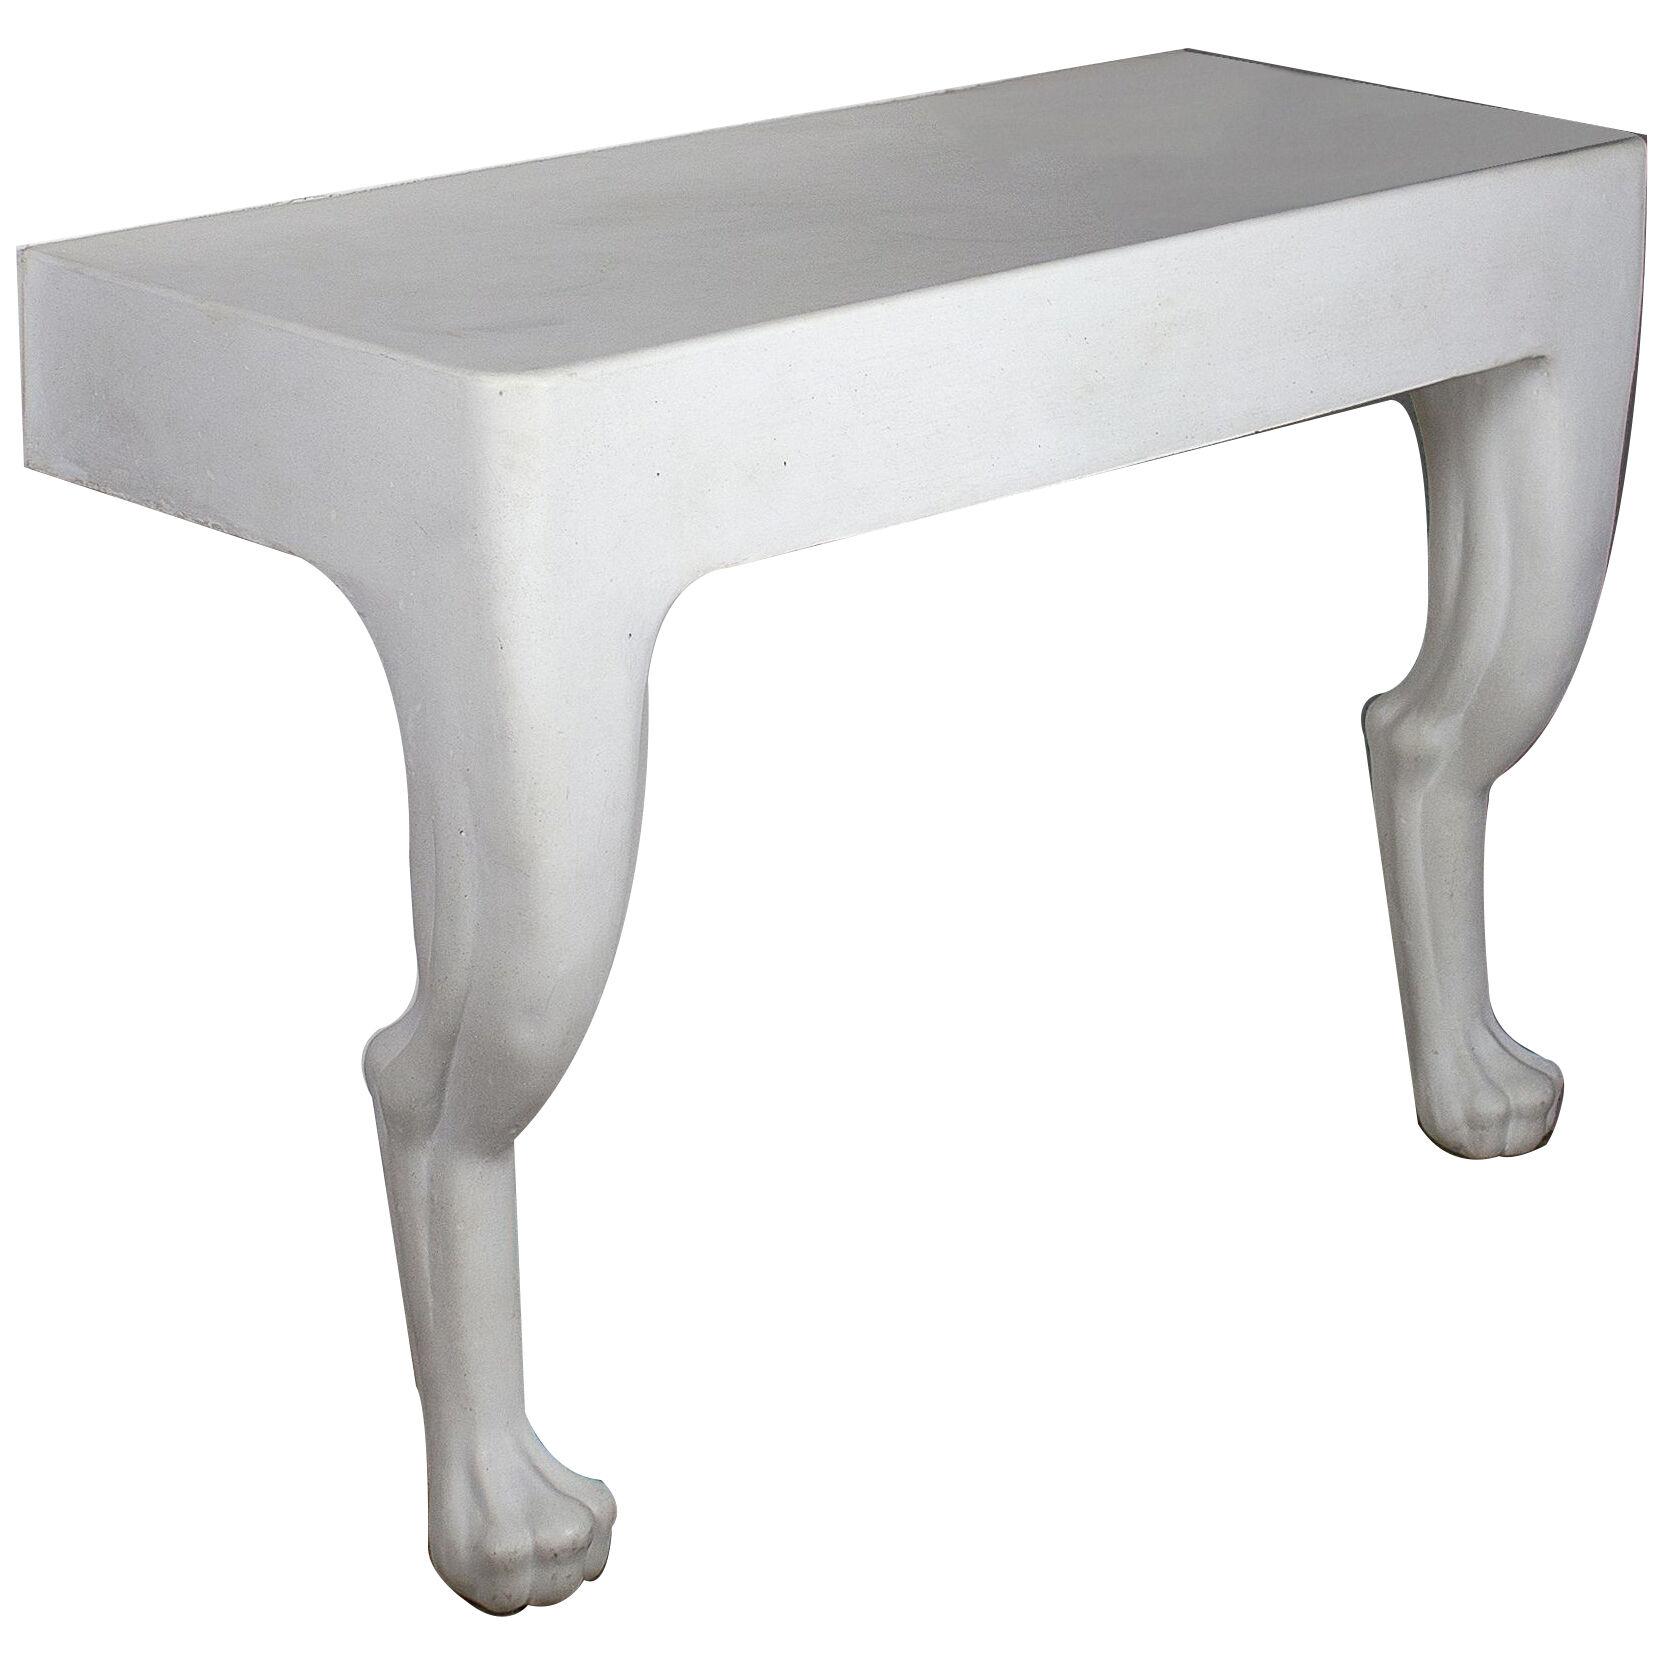 John Dickinson Two-Legged Zoomorphic Console Table - Prototype in Plaster